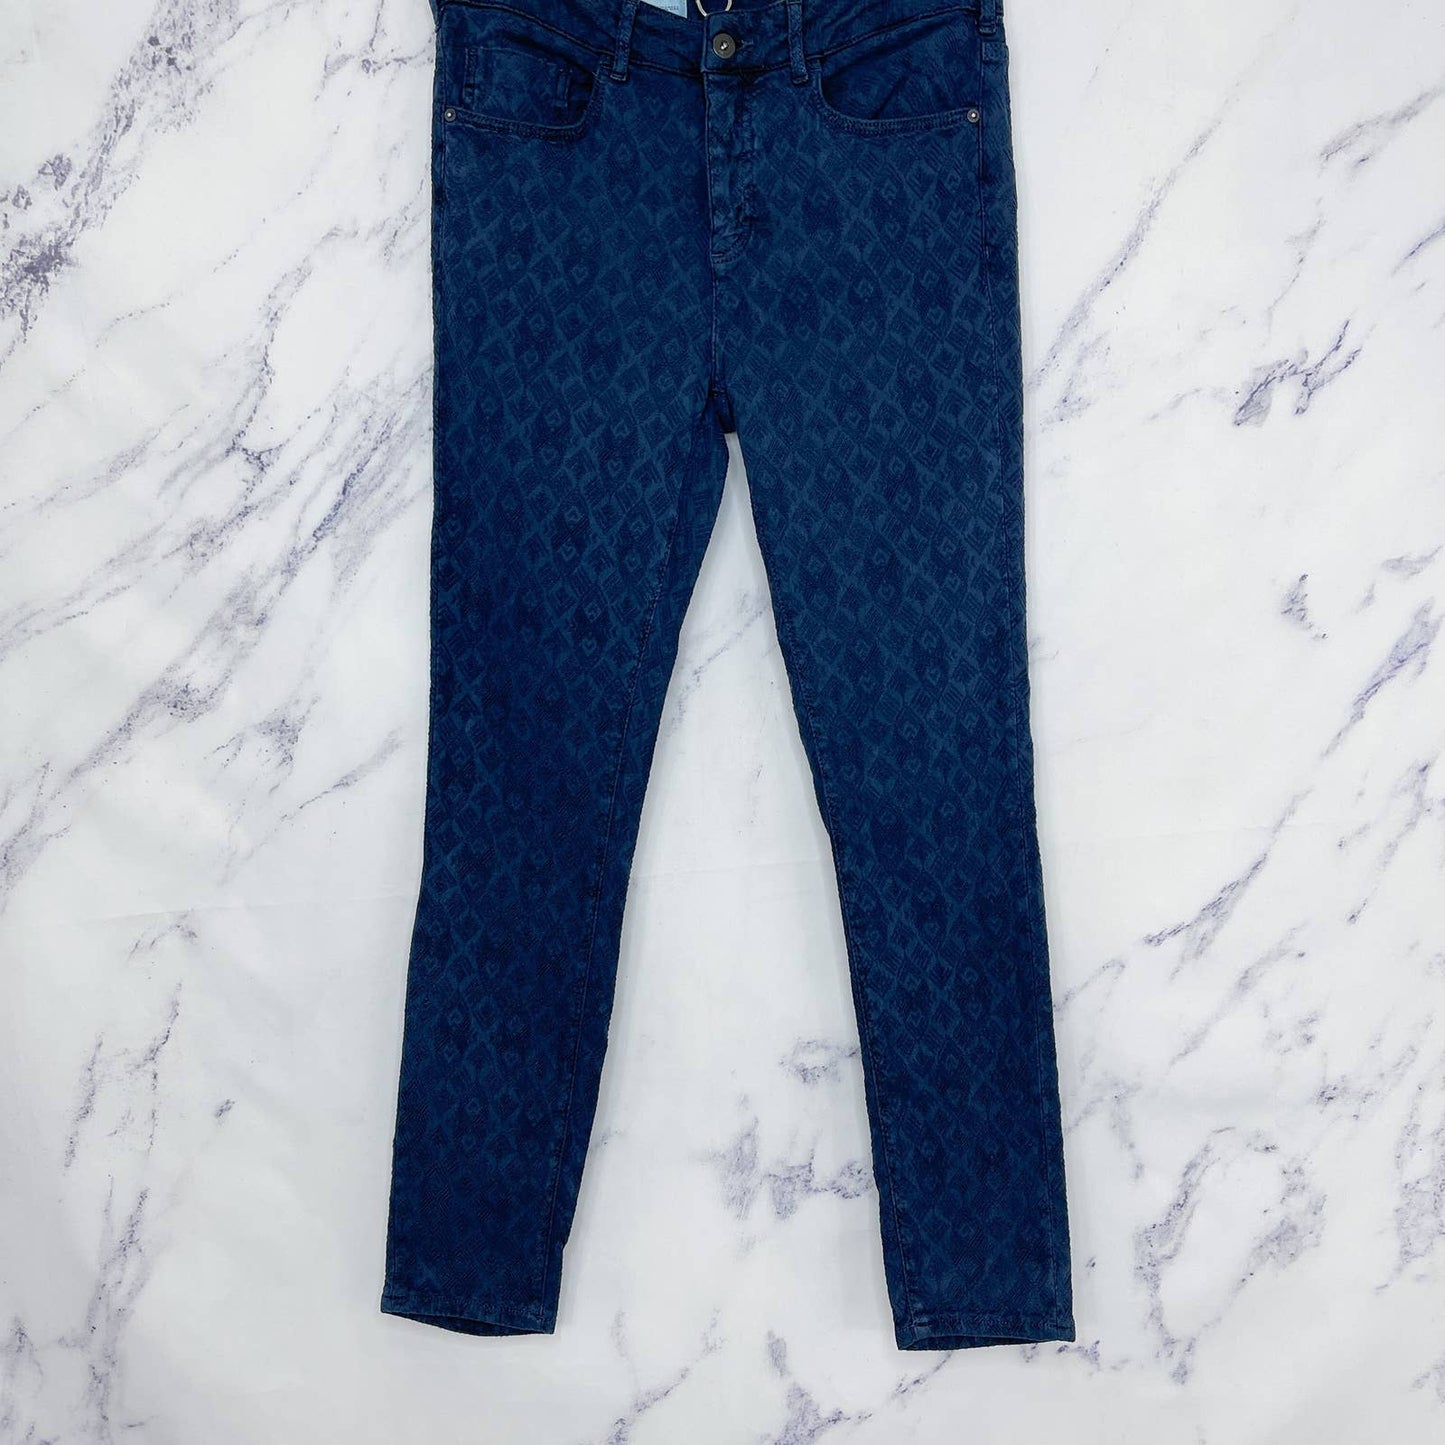 Anthropologie | Pilcro and the Letterpress | Textured Script Skinny Jeans | Navy | Sz 29